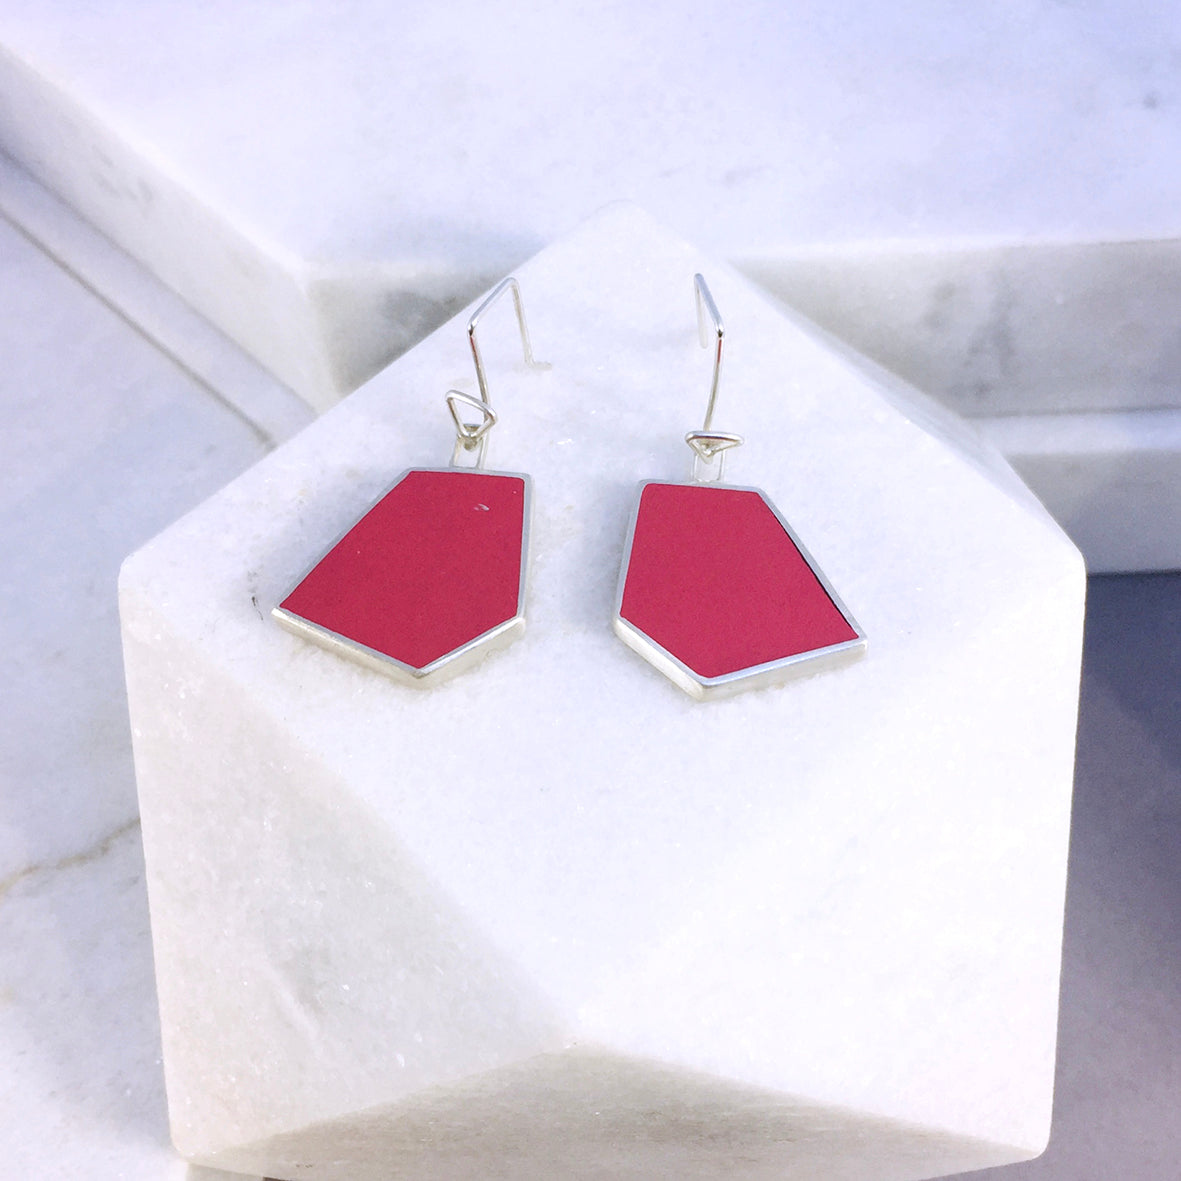 Reversible - Silver & Resin earrings - Red and yellow